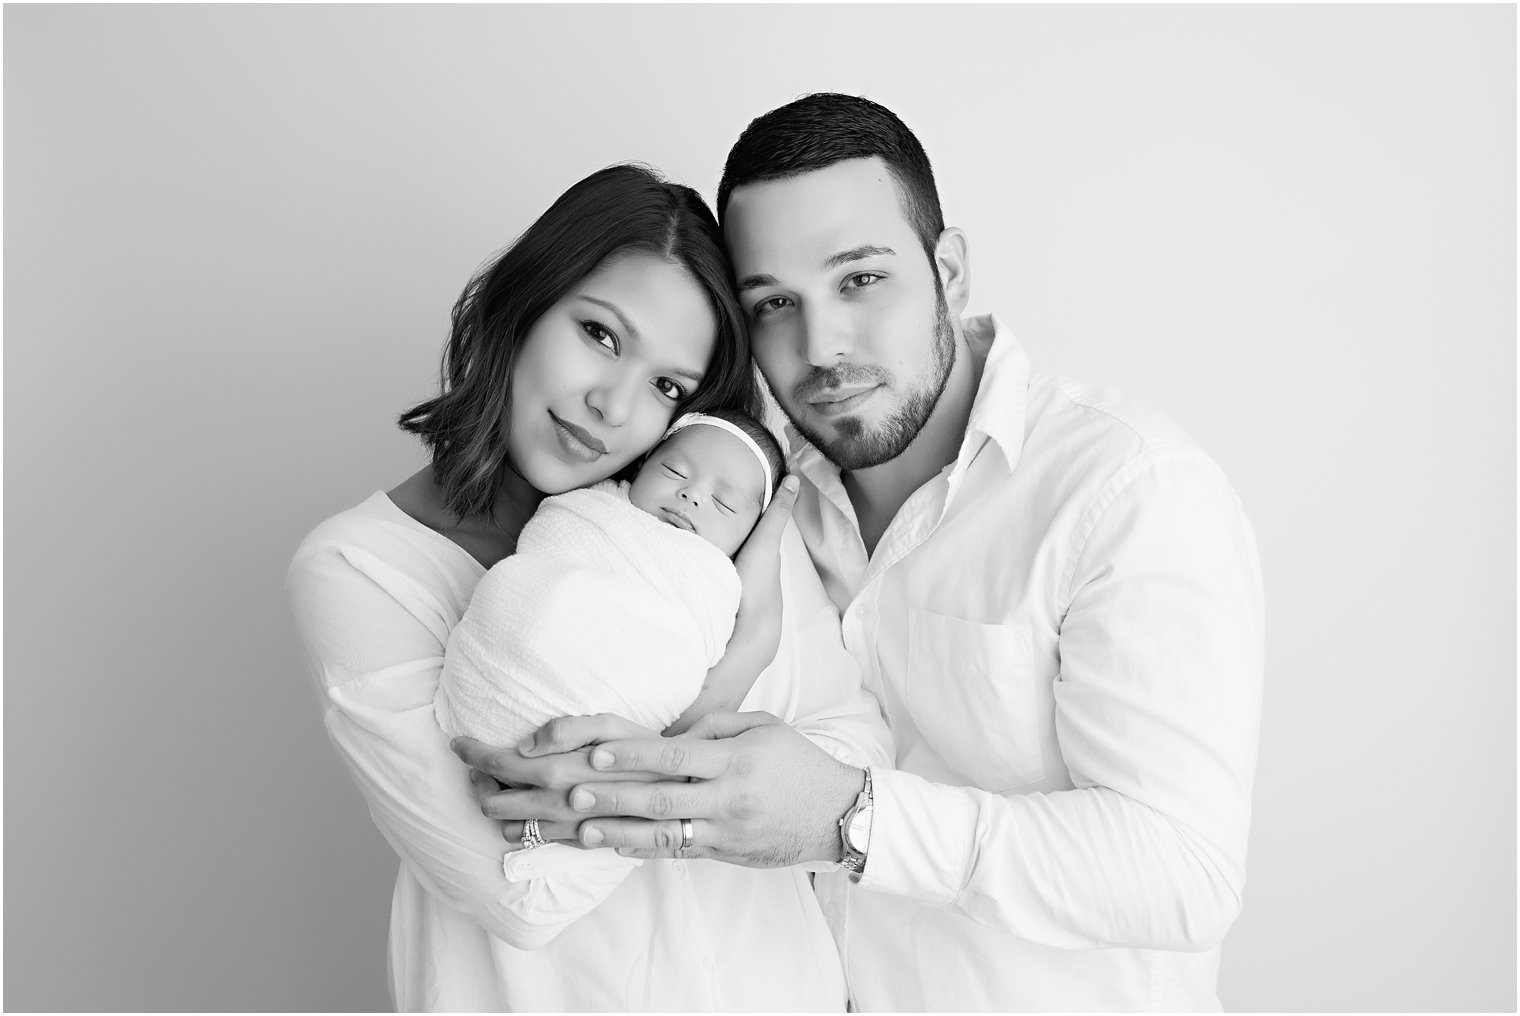 Newborn and family photo in black and white by Idalia Photography